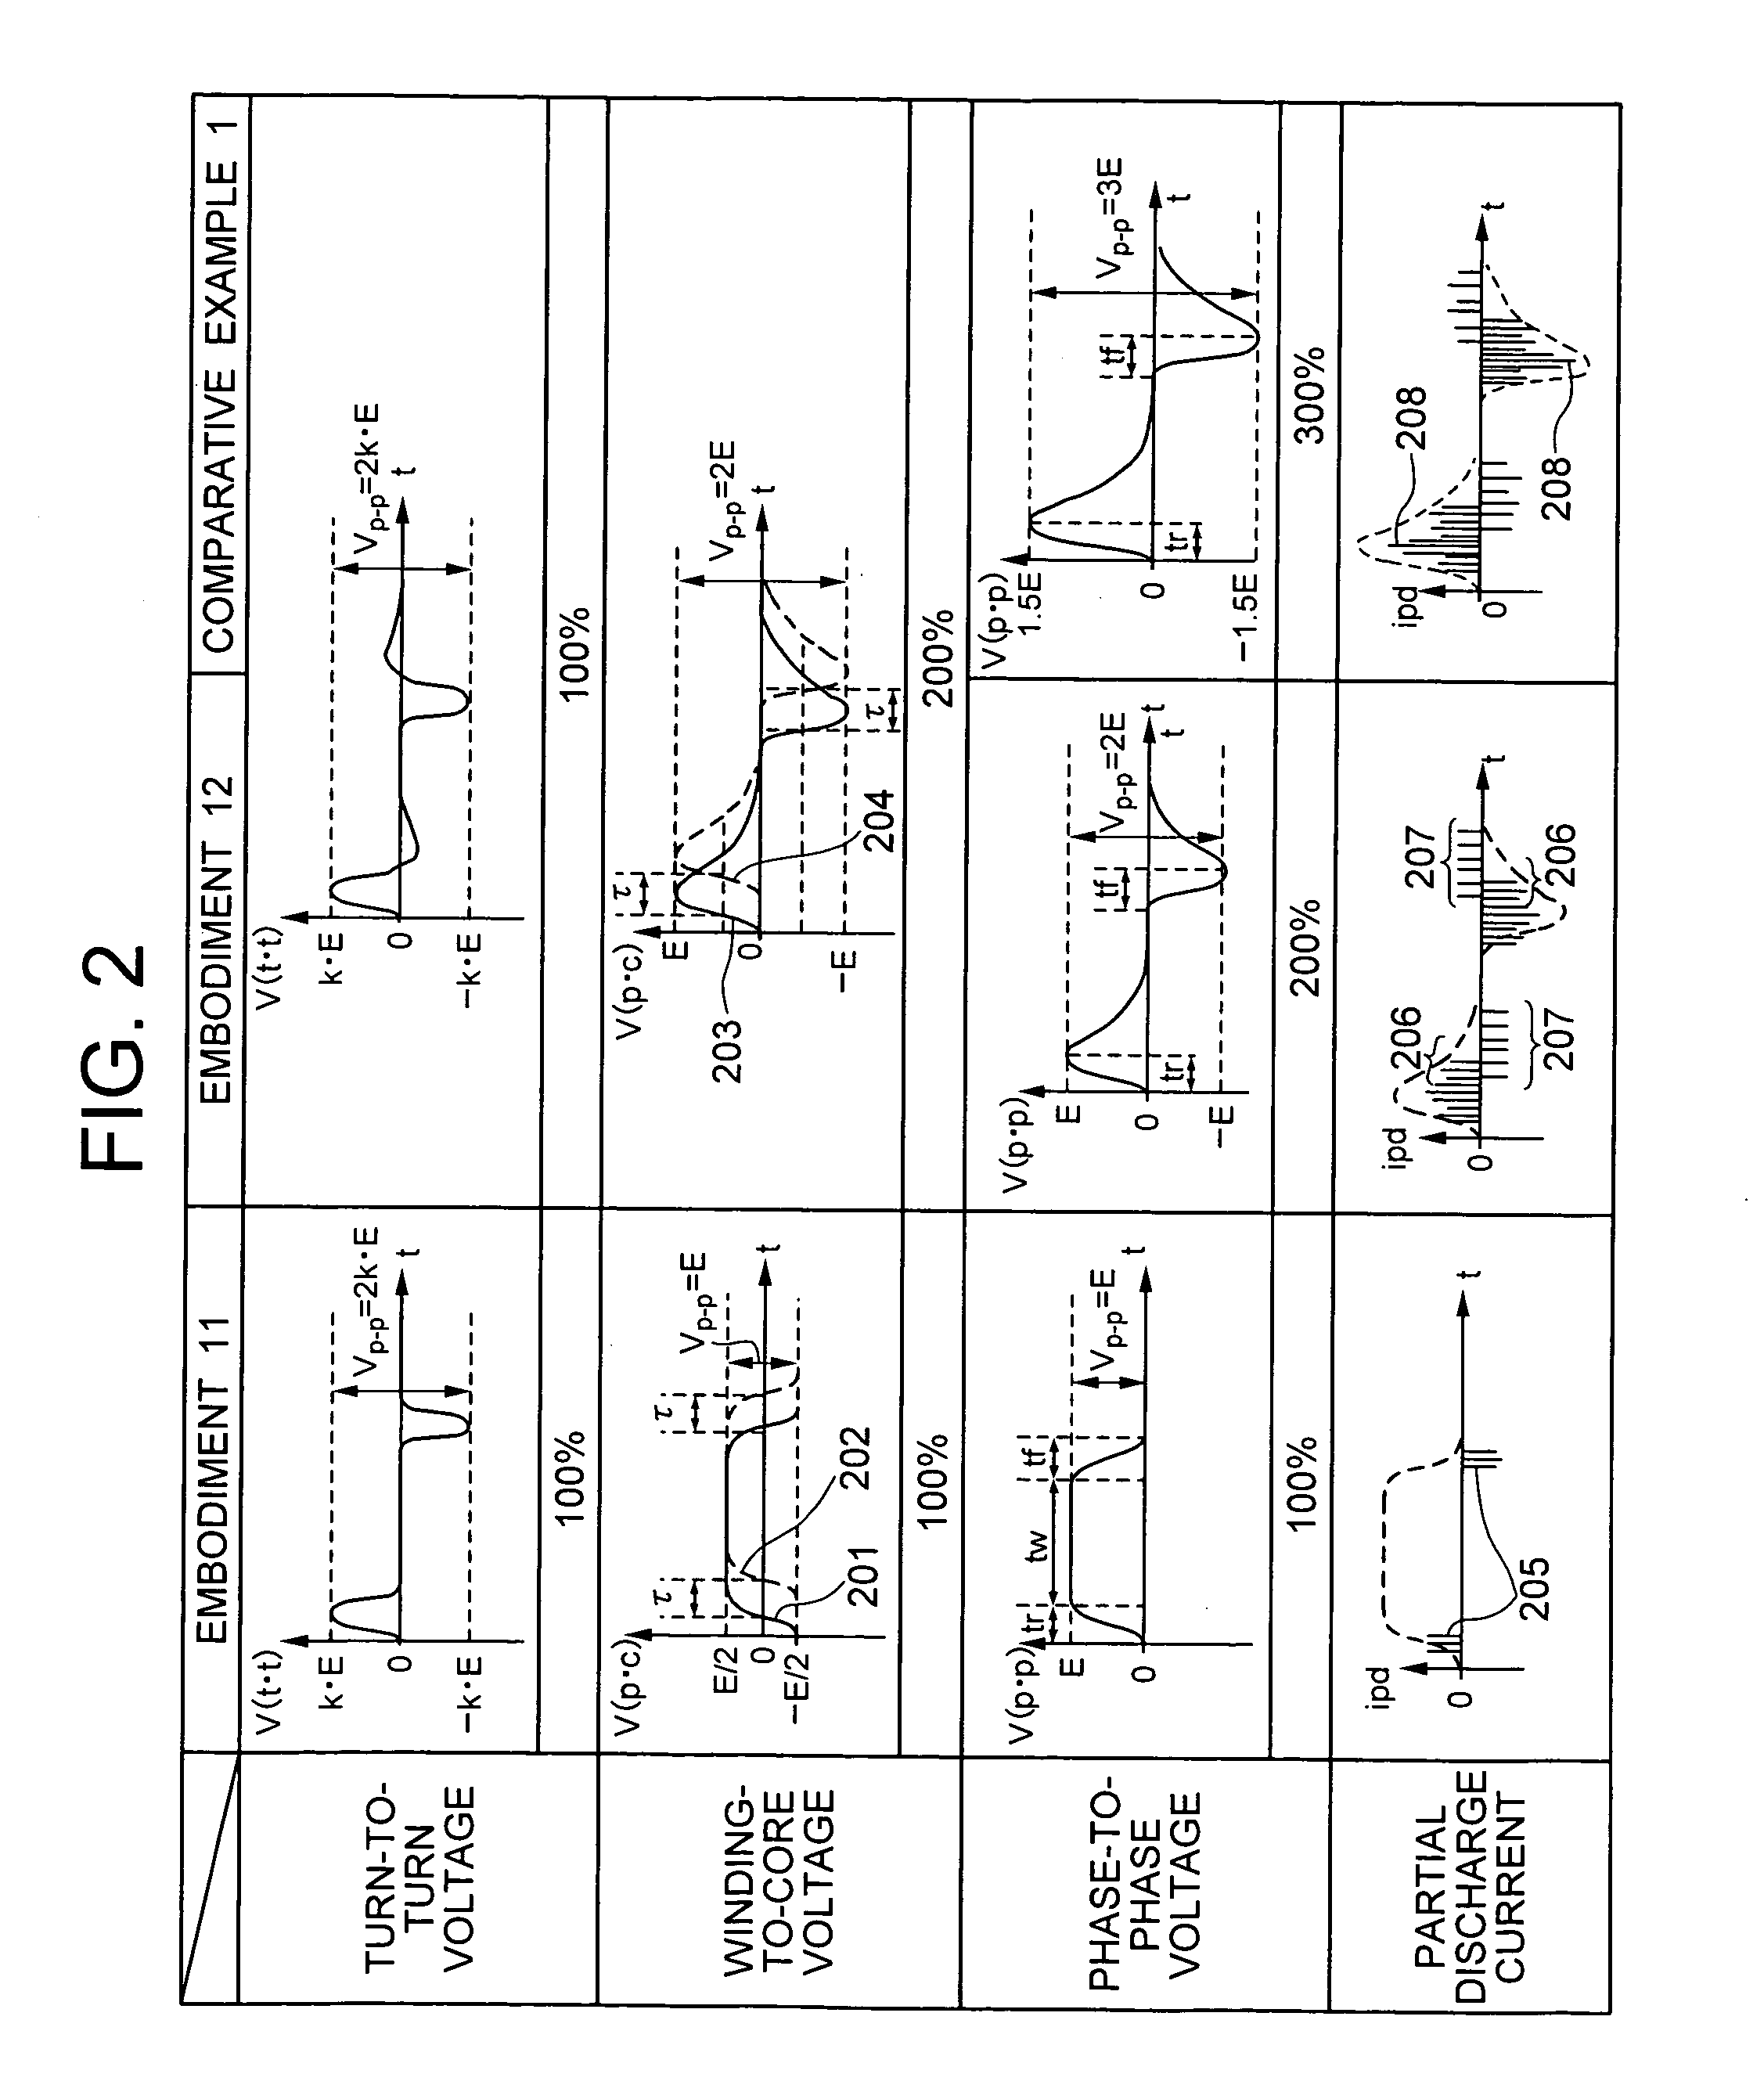 Apparatus for partial discharge detection of turn to turn insulation in motor